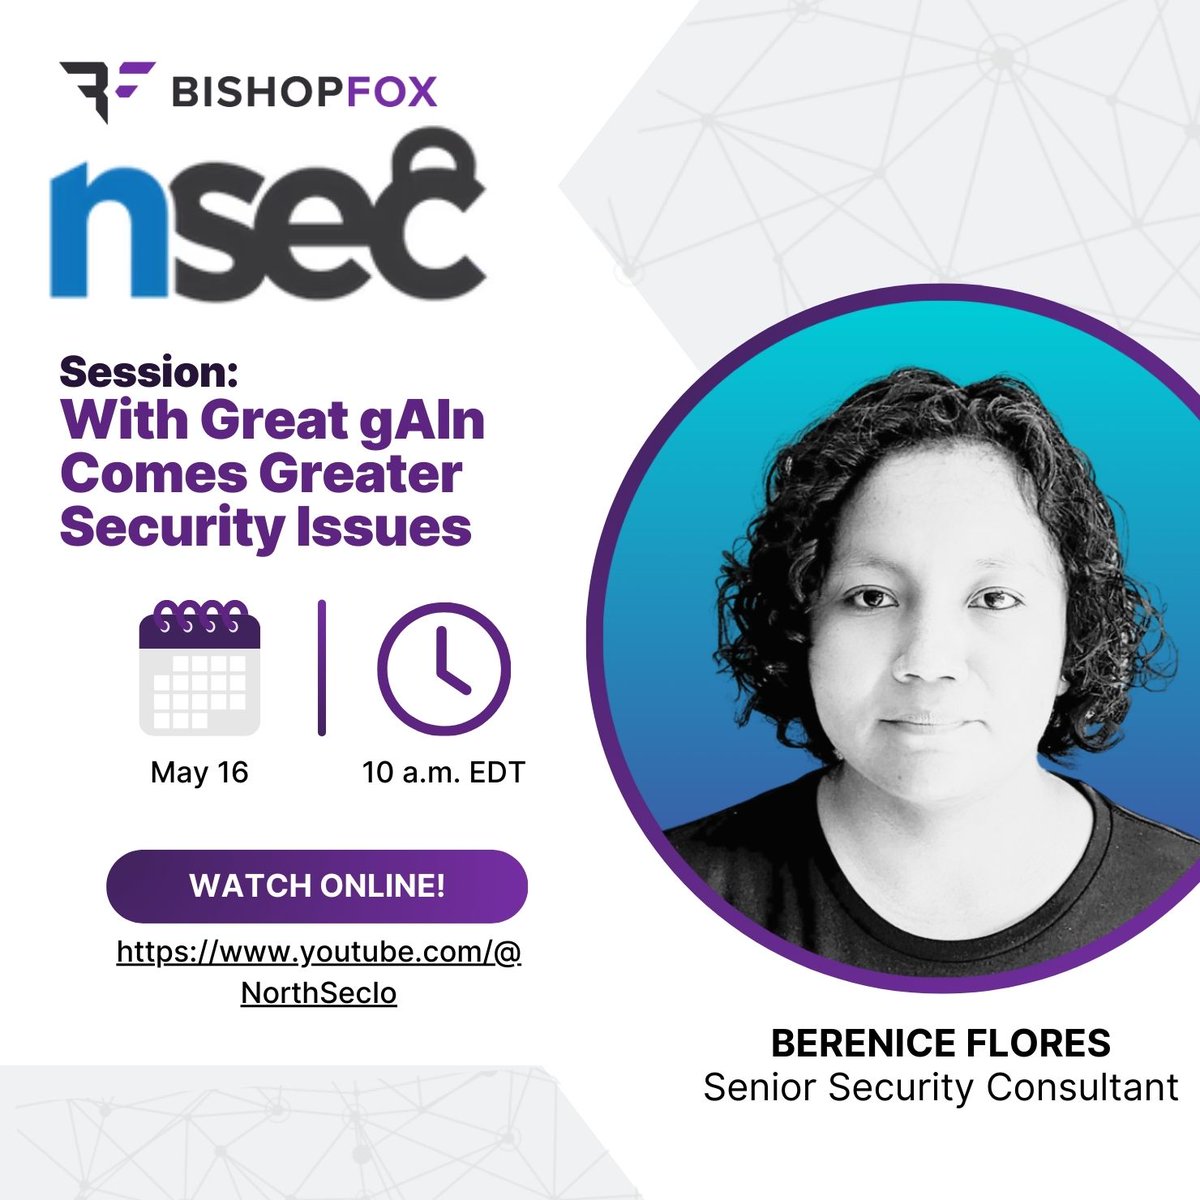 Don't miss our own Berenice Flores presenting tomorrow at @NorthSec_io in Montreal. She'll be discussing some of the risks associated with scaling ML frameworks. Learn more at bfx.social/3yrVjZz #AI #CyberSecurity